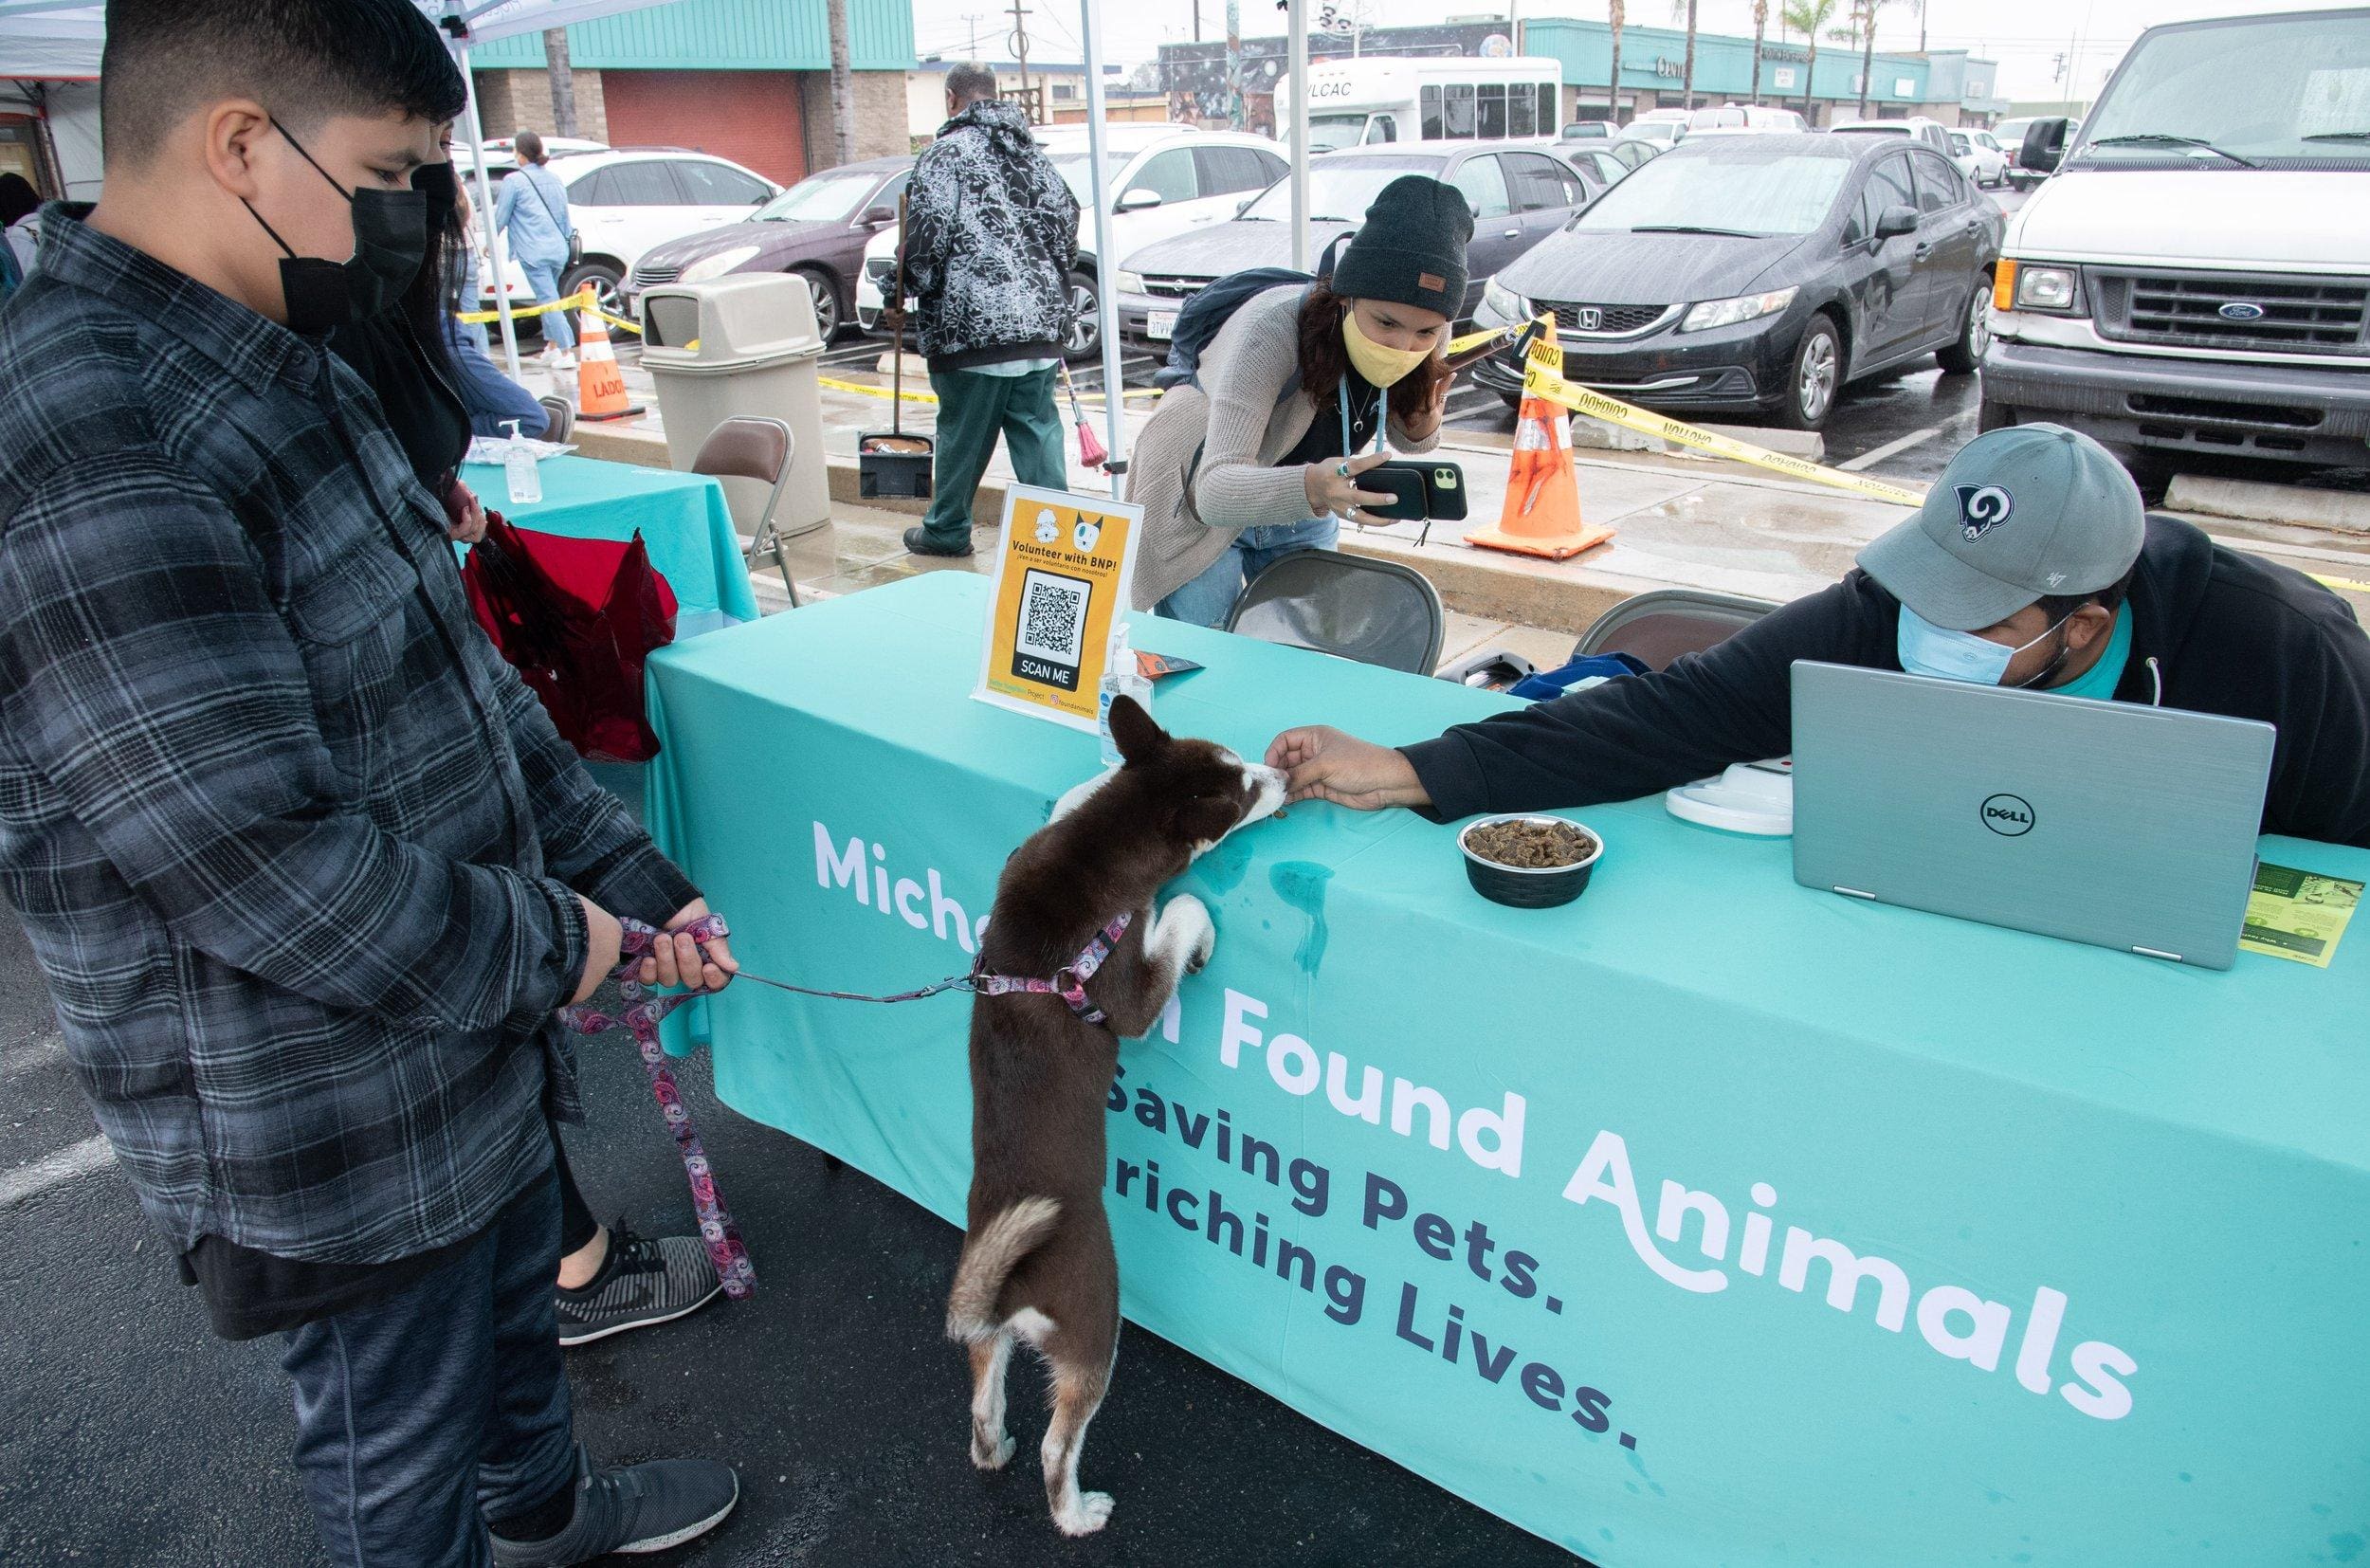 Better Neighbor Project Provides Pet Food and Services to Hundreds of Watts Residents